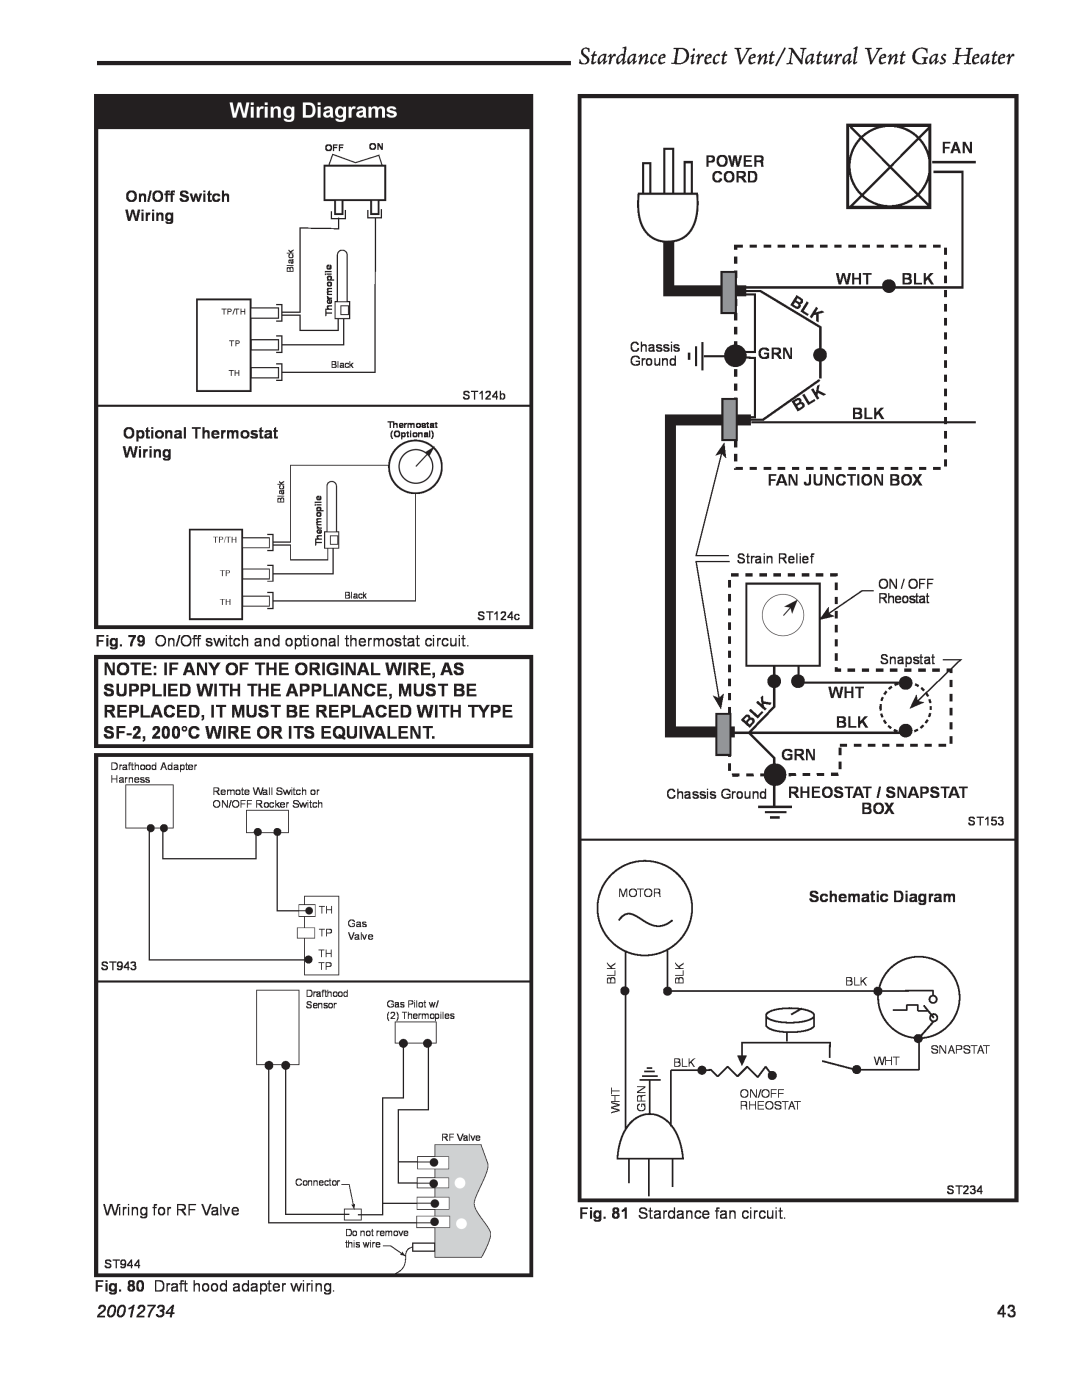 Vermont Casting SDDVTCMB, SDDVTCVG manual Wiring Diagrams, Stardance Direct Vent/Natural Vent Gas Heater, 20012734, Power 